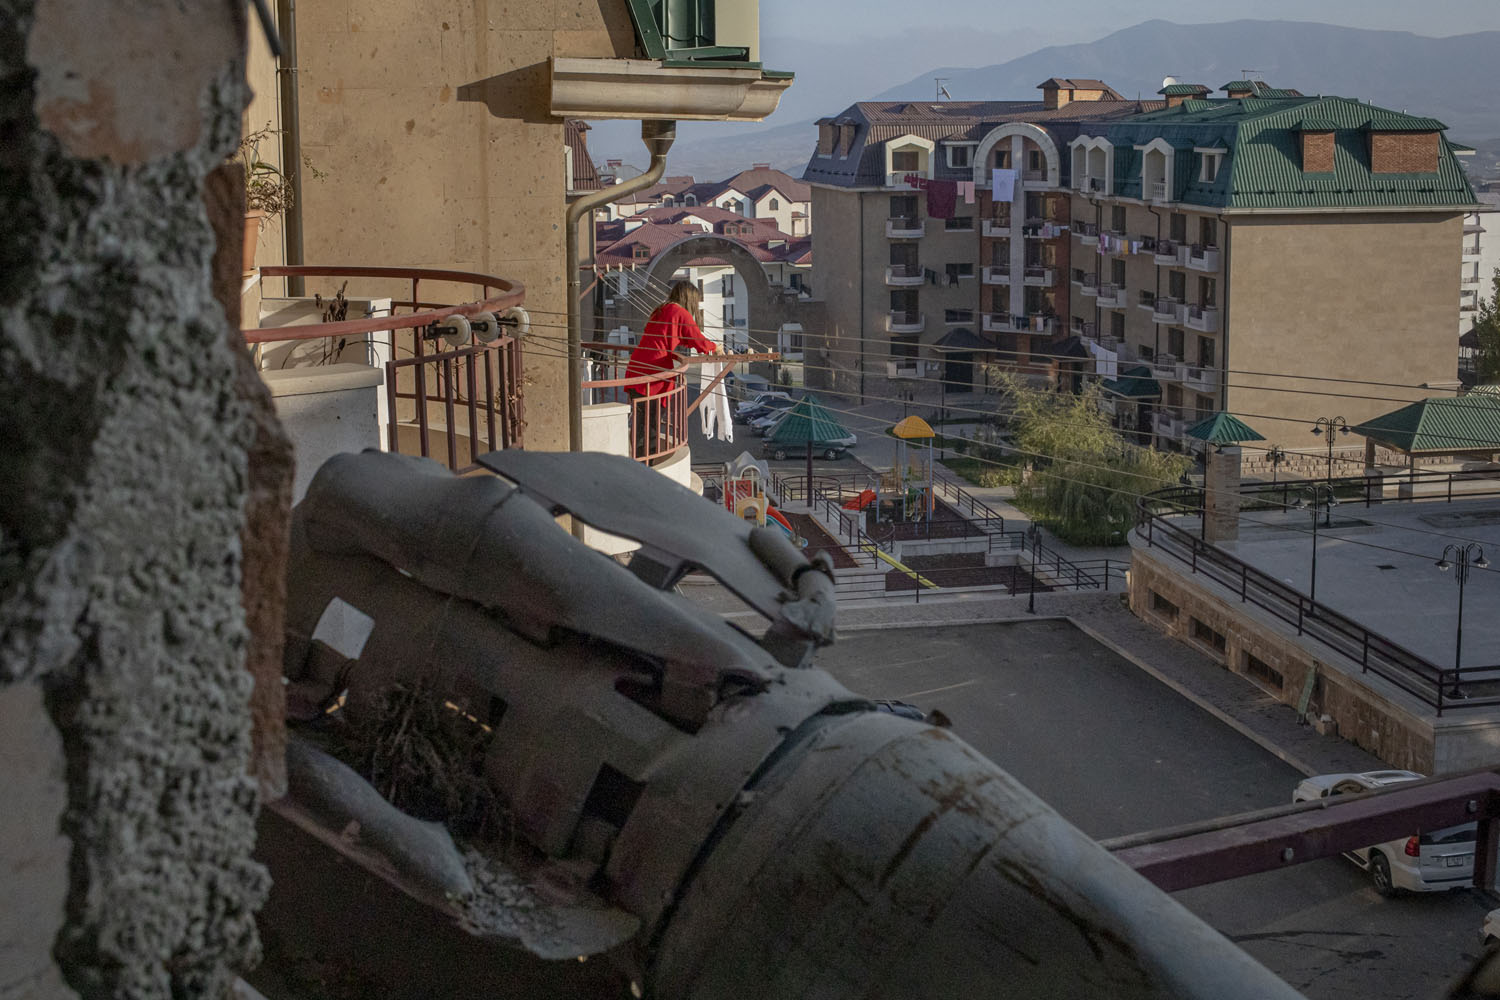 Stepanakert’s neat backyards and the remains of a rocket on a family’s balcony. While a lady was hanging her laundry on the balcony across, the HALO trust was removing this piece from the apartment.